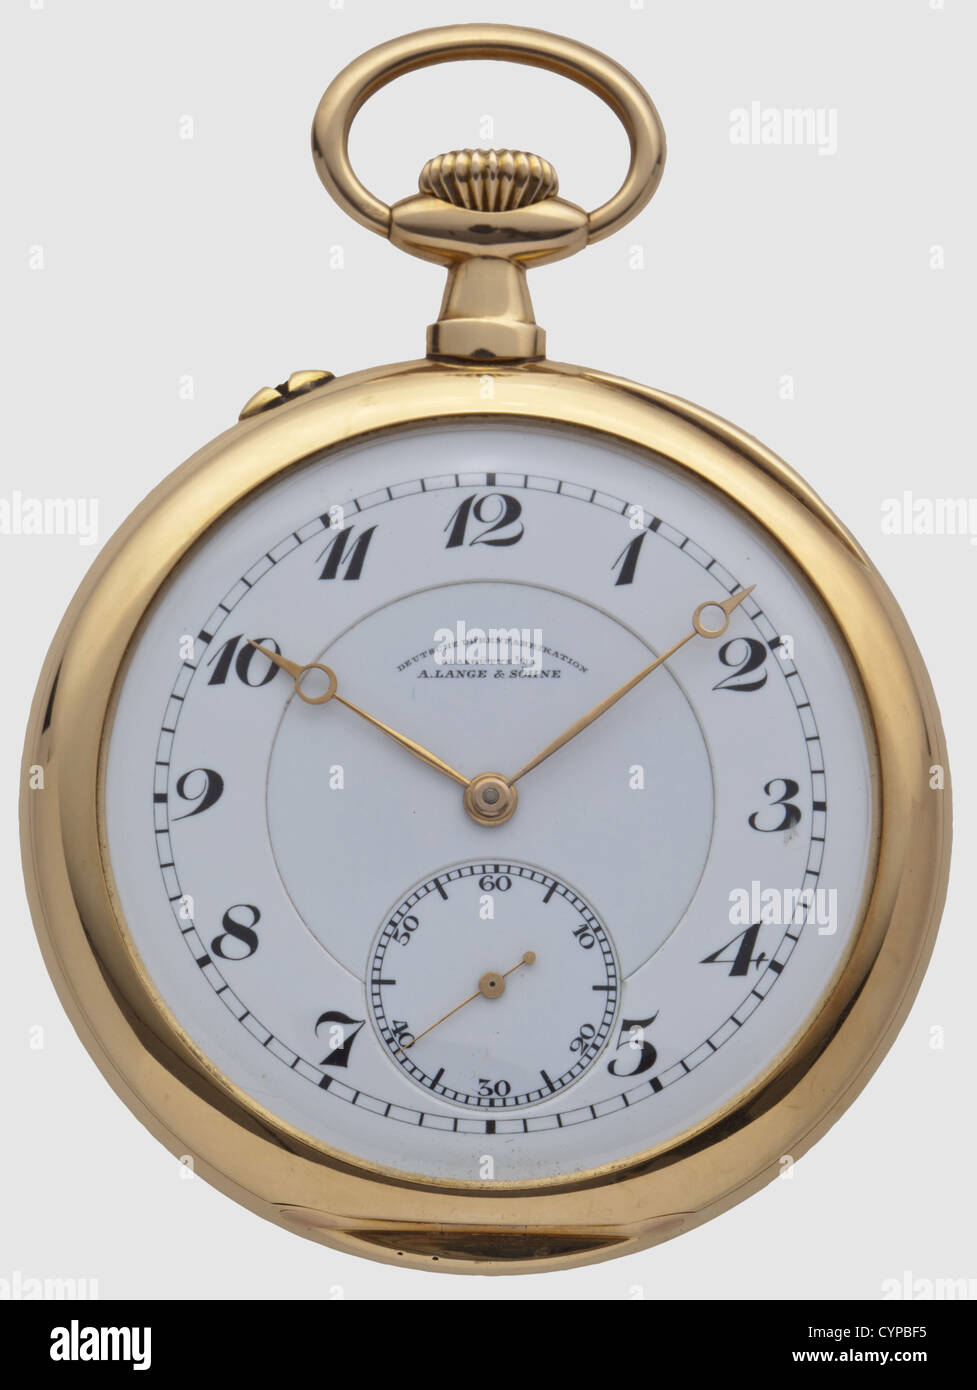 A gold savonette,Deutsche Uhrenfabrikation A. Lange & Söhne Glashütte in Sachsen'(German Watch Manufacture A. Lange & Sons,Glashütte in Saxony)circa 1914. 14 carat. Smooth case,white enamel dial,and precision movement no. 76328. Housing and dial inscribed as above. Gooseneck fine adjustment,and gold escapement lever and gold escapement wheel. Diameter 53 mm. In a gold-stamped leather case. Also a golden watch chain with a snap catch,ring,uncut seal and cameo,historic,historical,1910s,20th century,handicrafts,handcraft,craft,object,objects,sti,Additional-Rights-Clearences-Not Available Stock Photo